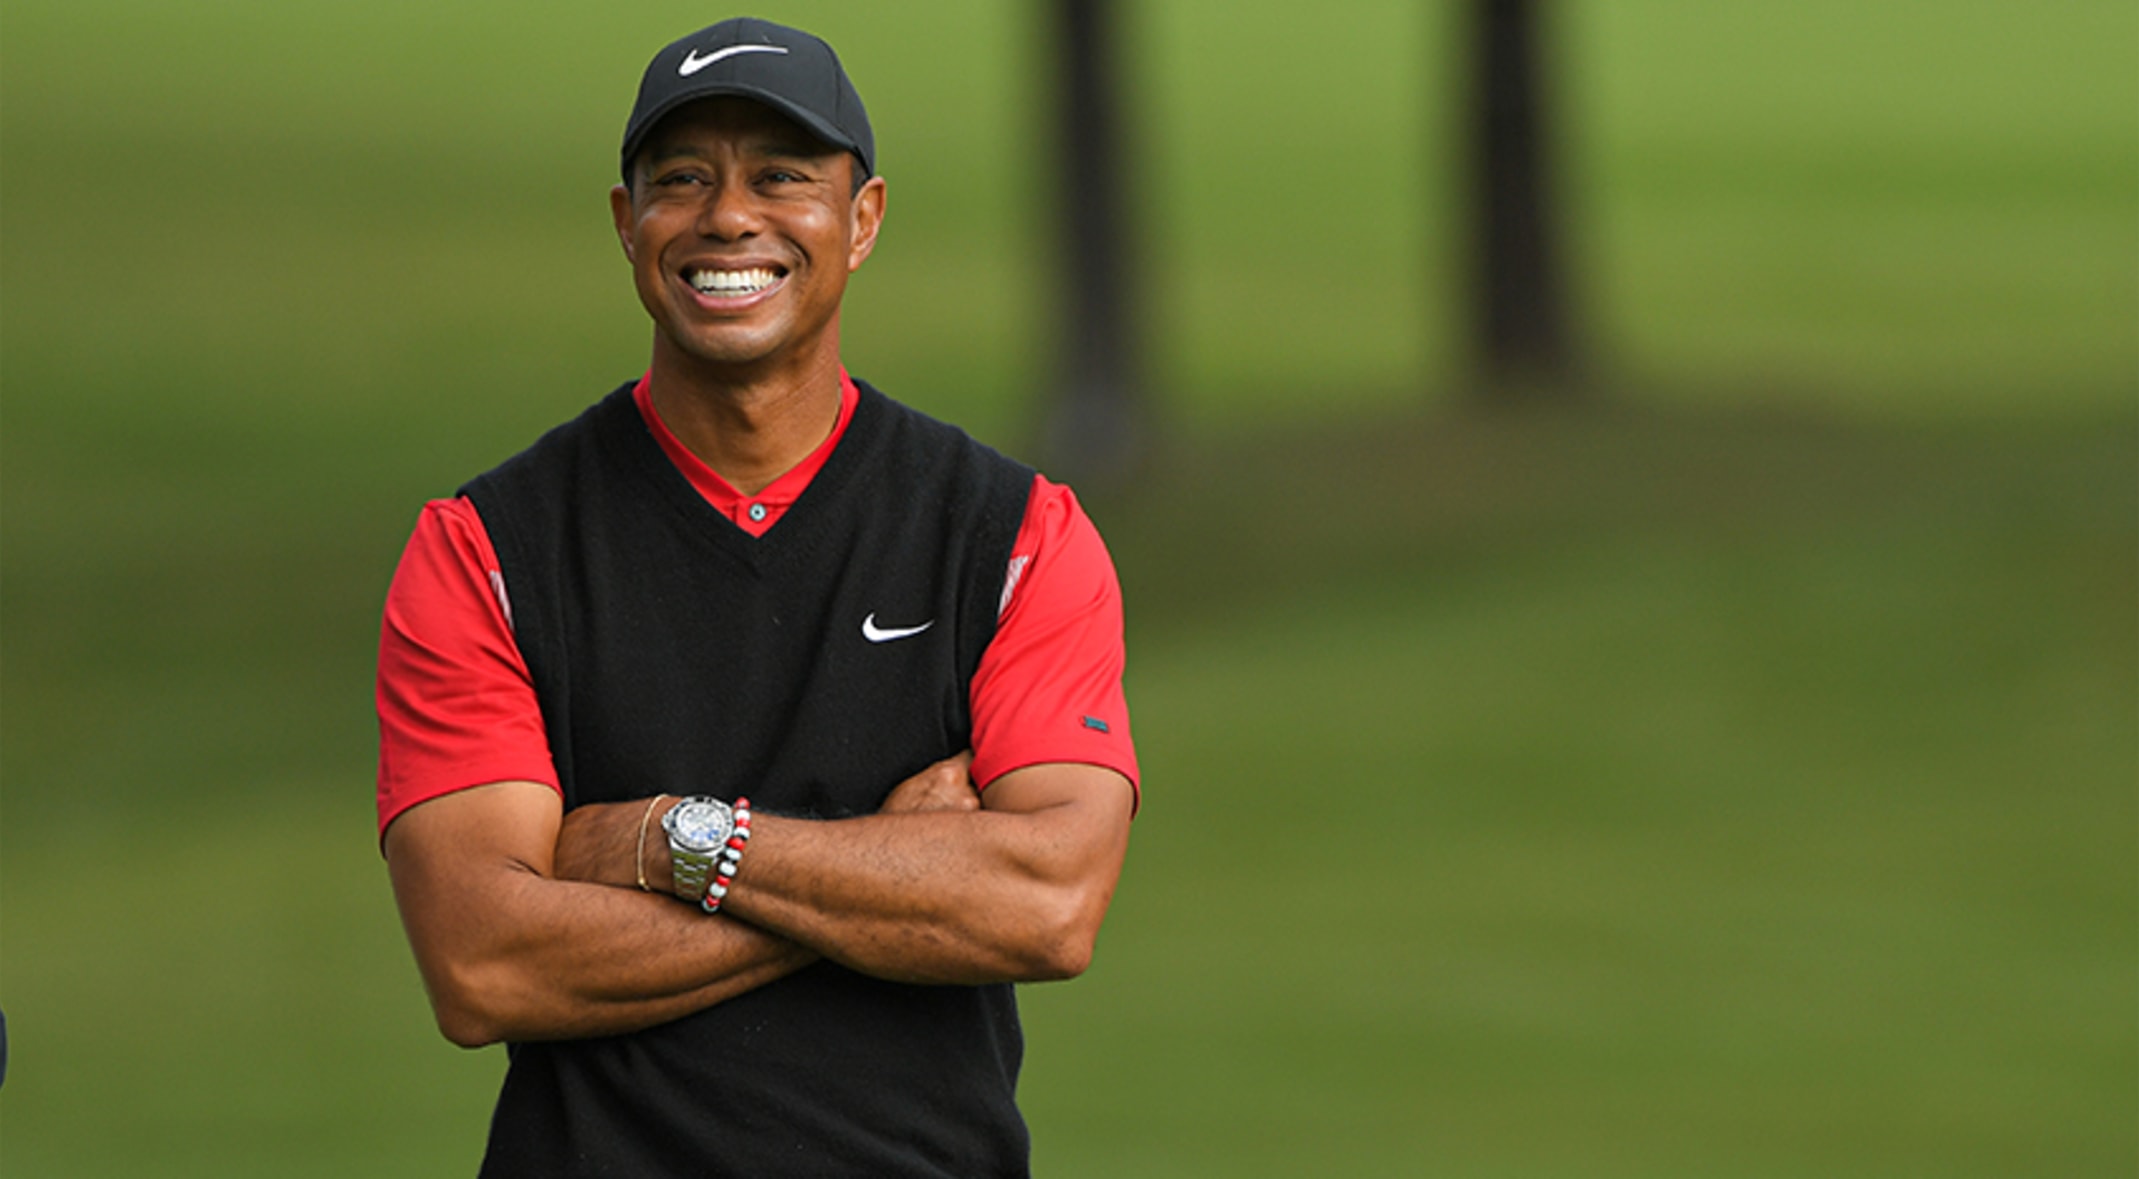 Tiger Woods documentary coming to HBO in the fall